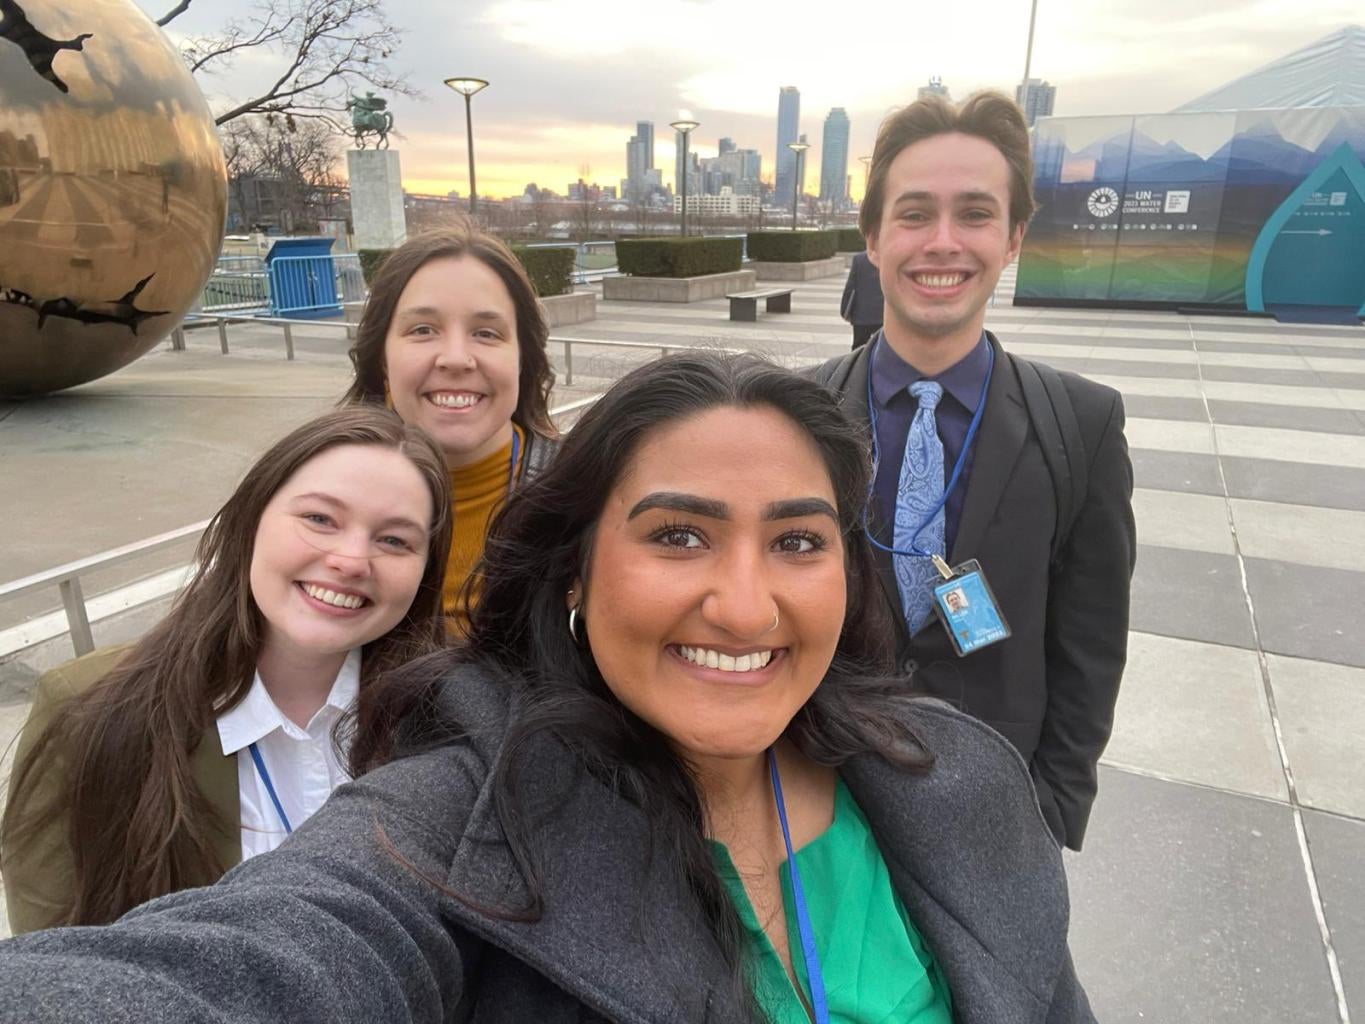 "Students selfie outside UN water conference"